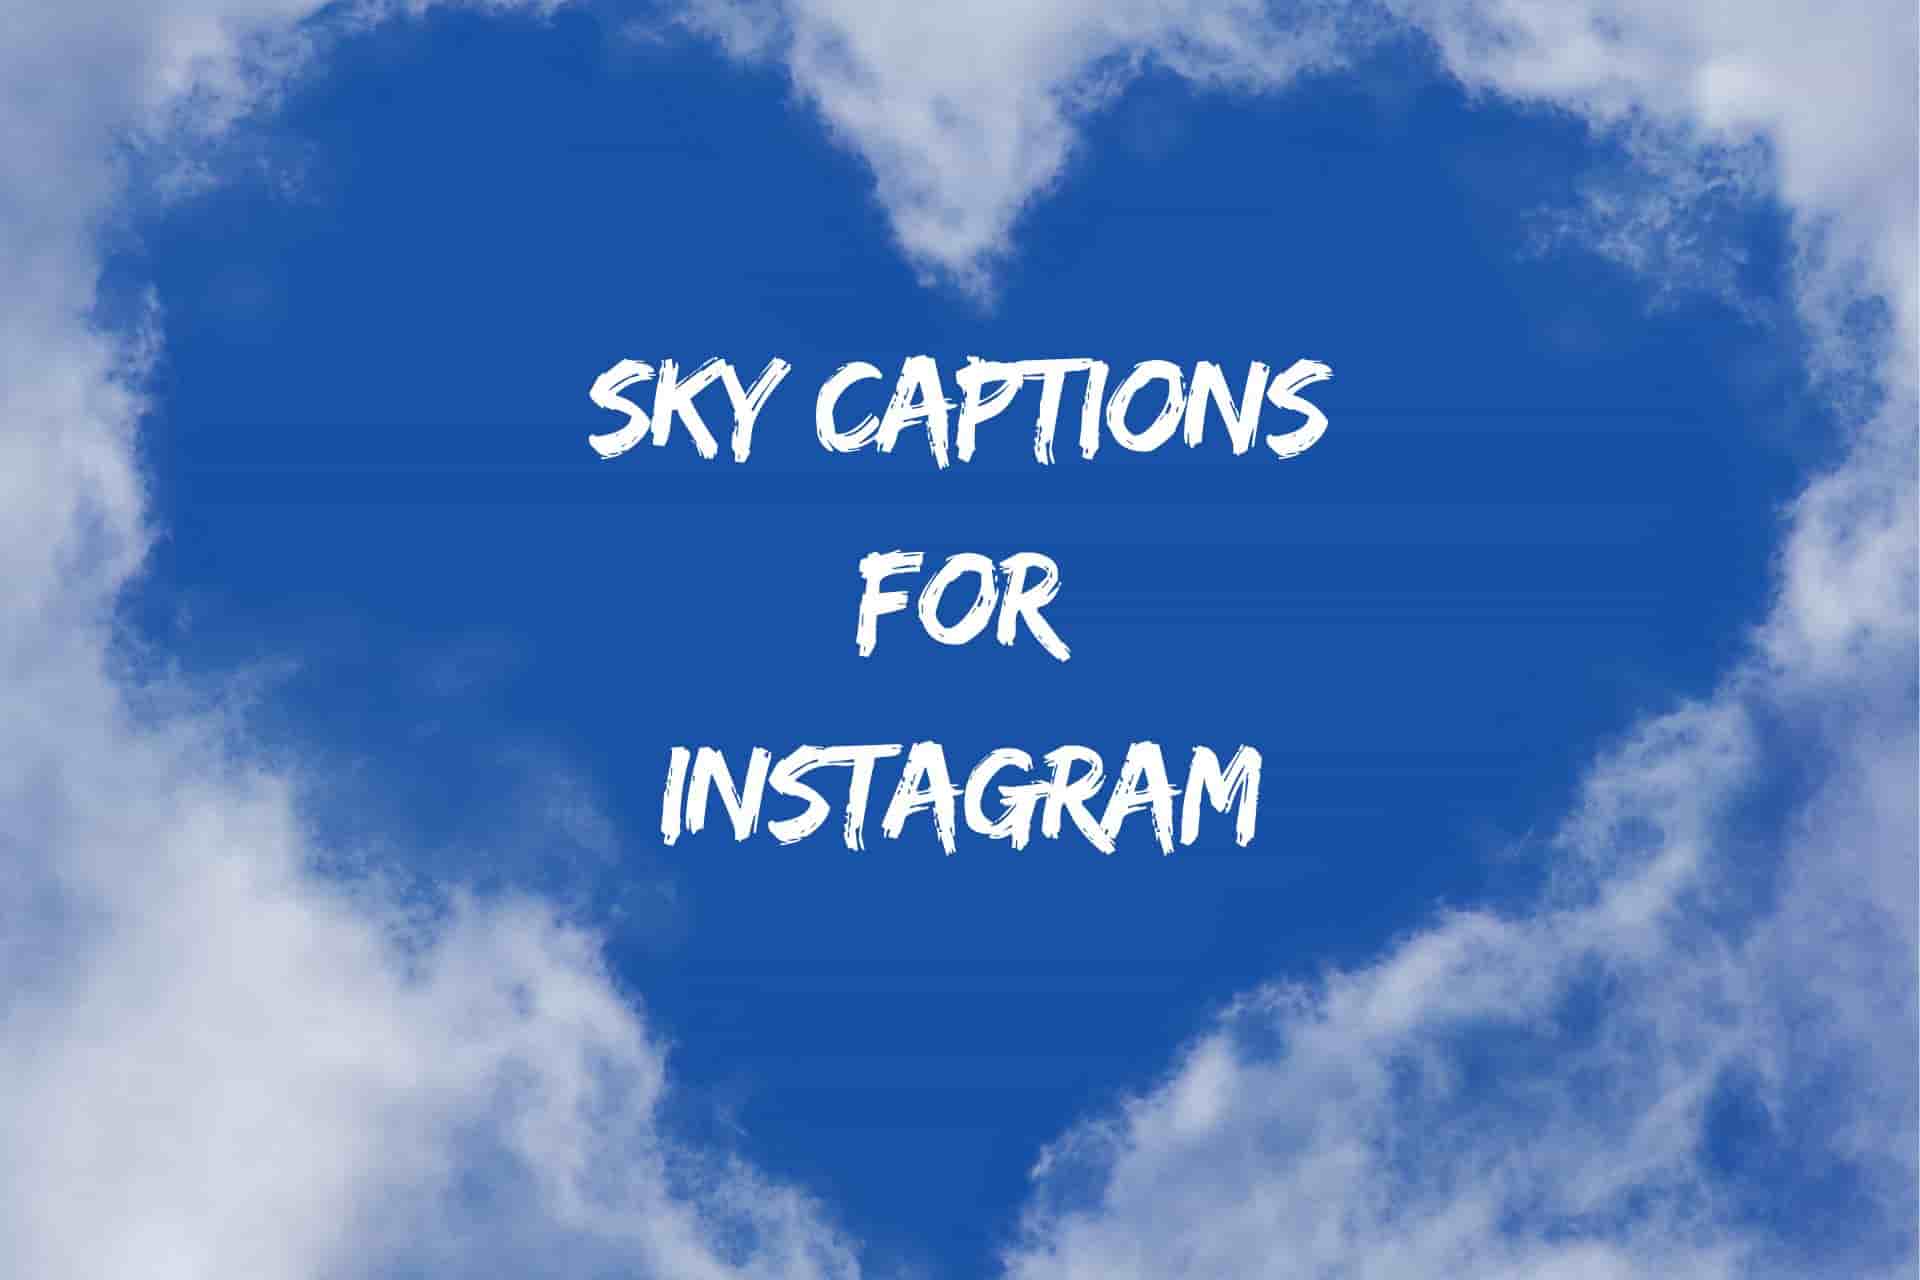 Best Sky Captions For Instagram, Sky Quotes For Instagram, Captions About Sky And Clouds, Caption For Sky Pic, Blue Sky Captions For Instagram, Evening Sky Captions For Instagram, Night Sky Captions For Instagram, Beautiful Sky Captions, And Cloudy Sky Captions.